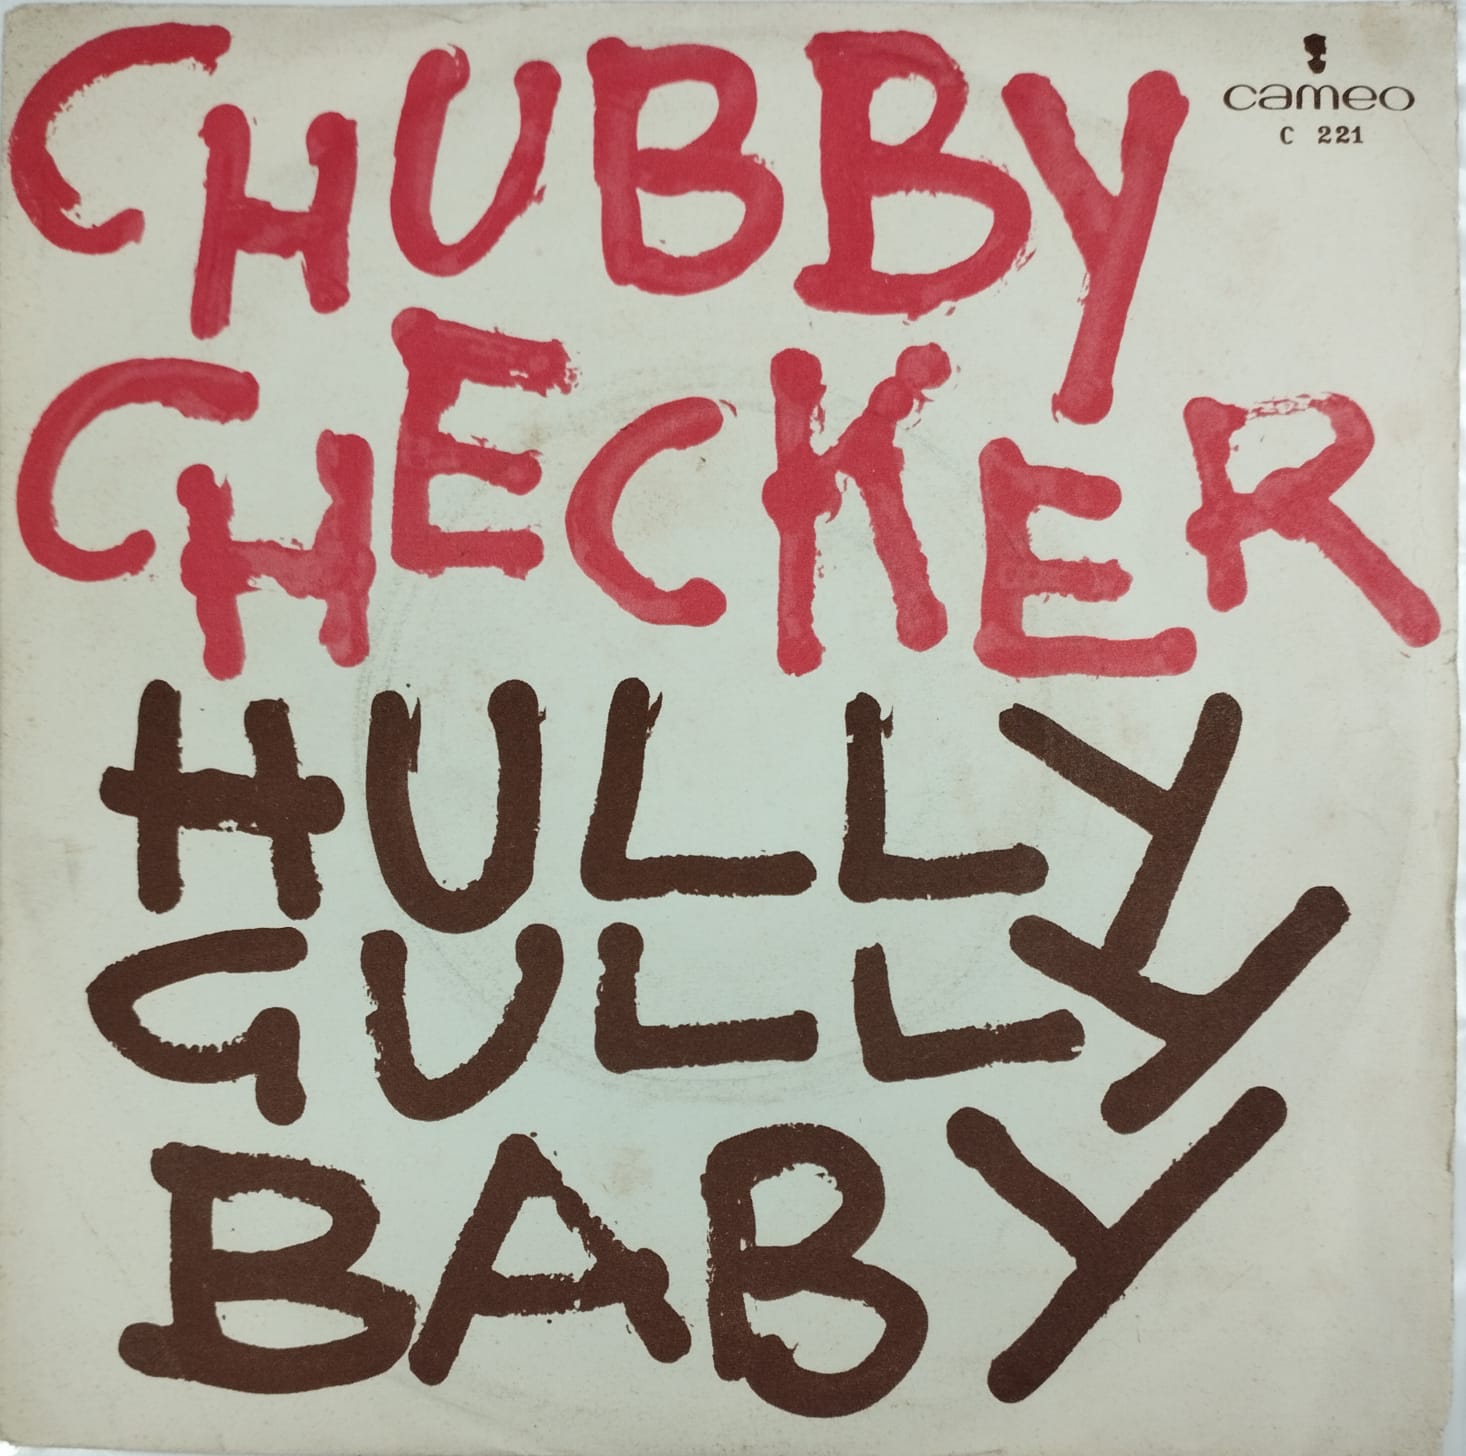 Chubby Checker ‎– The Hully Gully (Compacto)